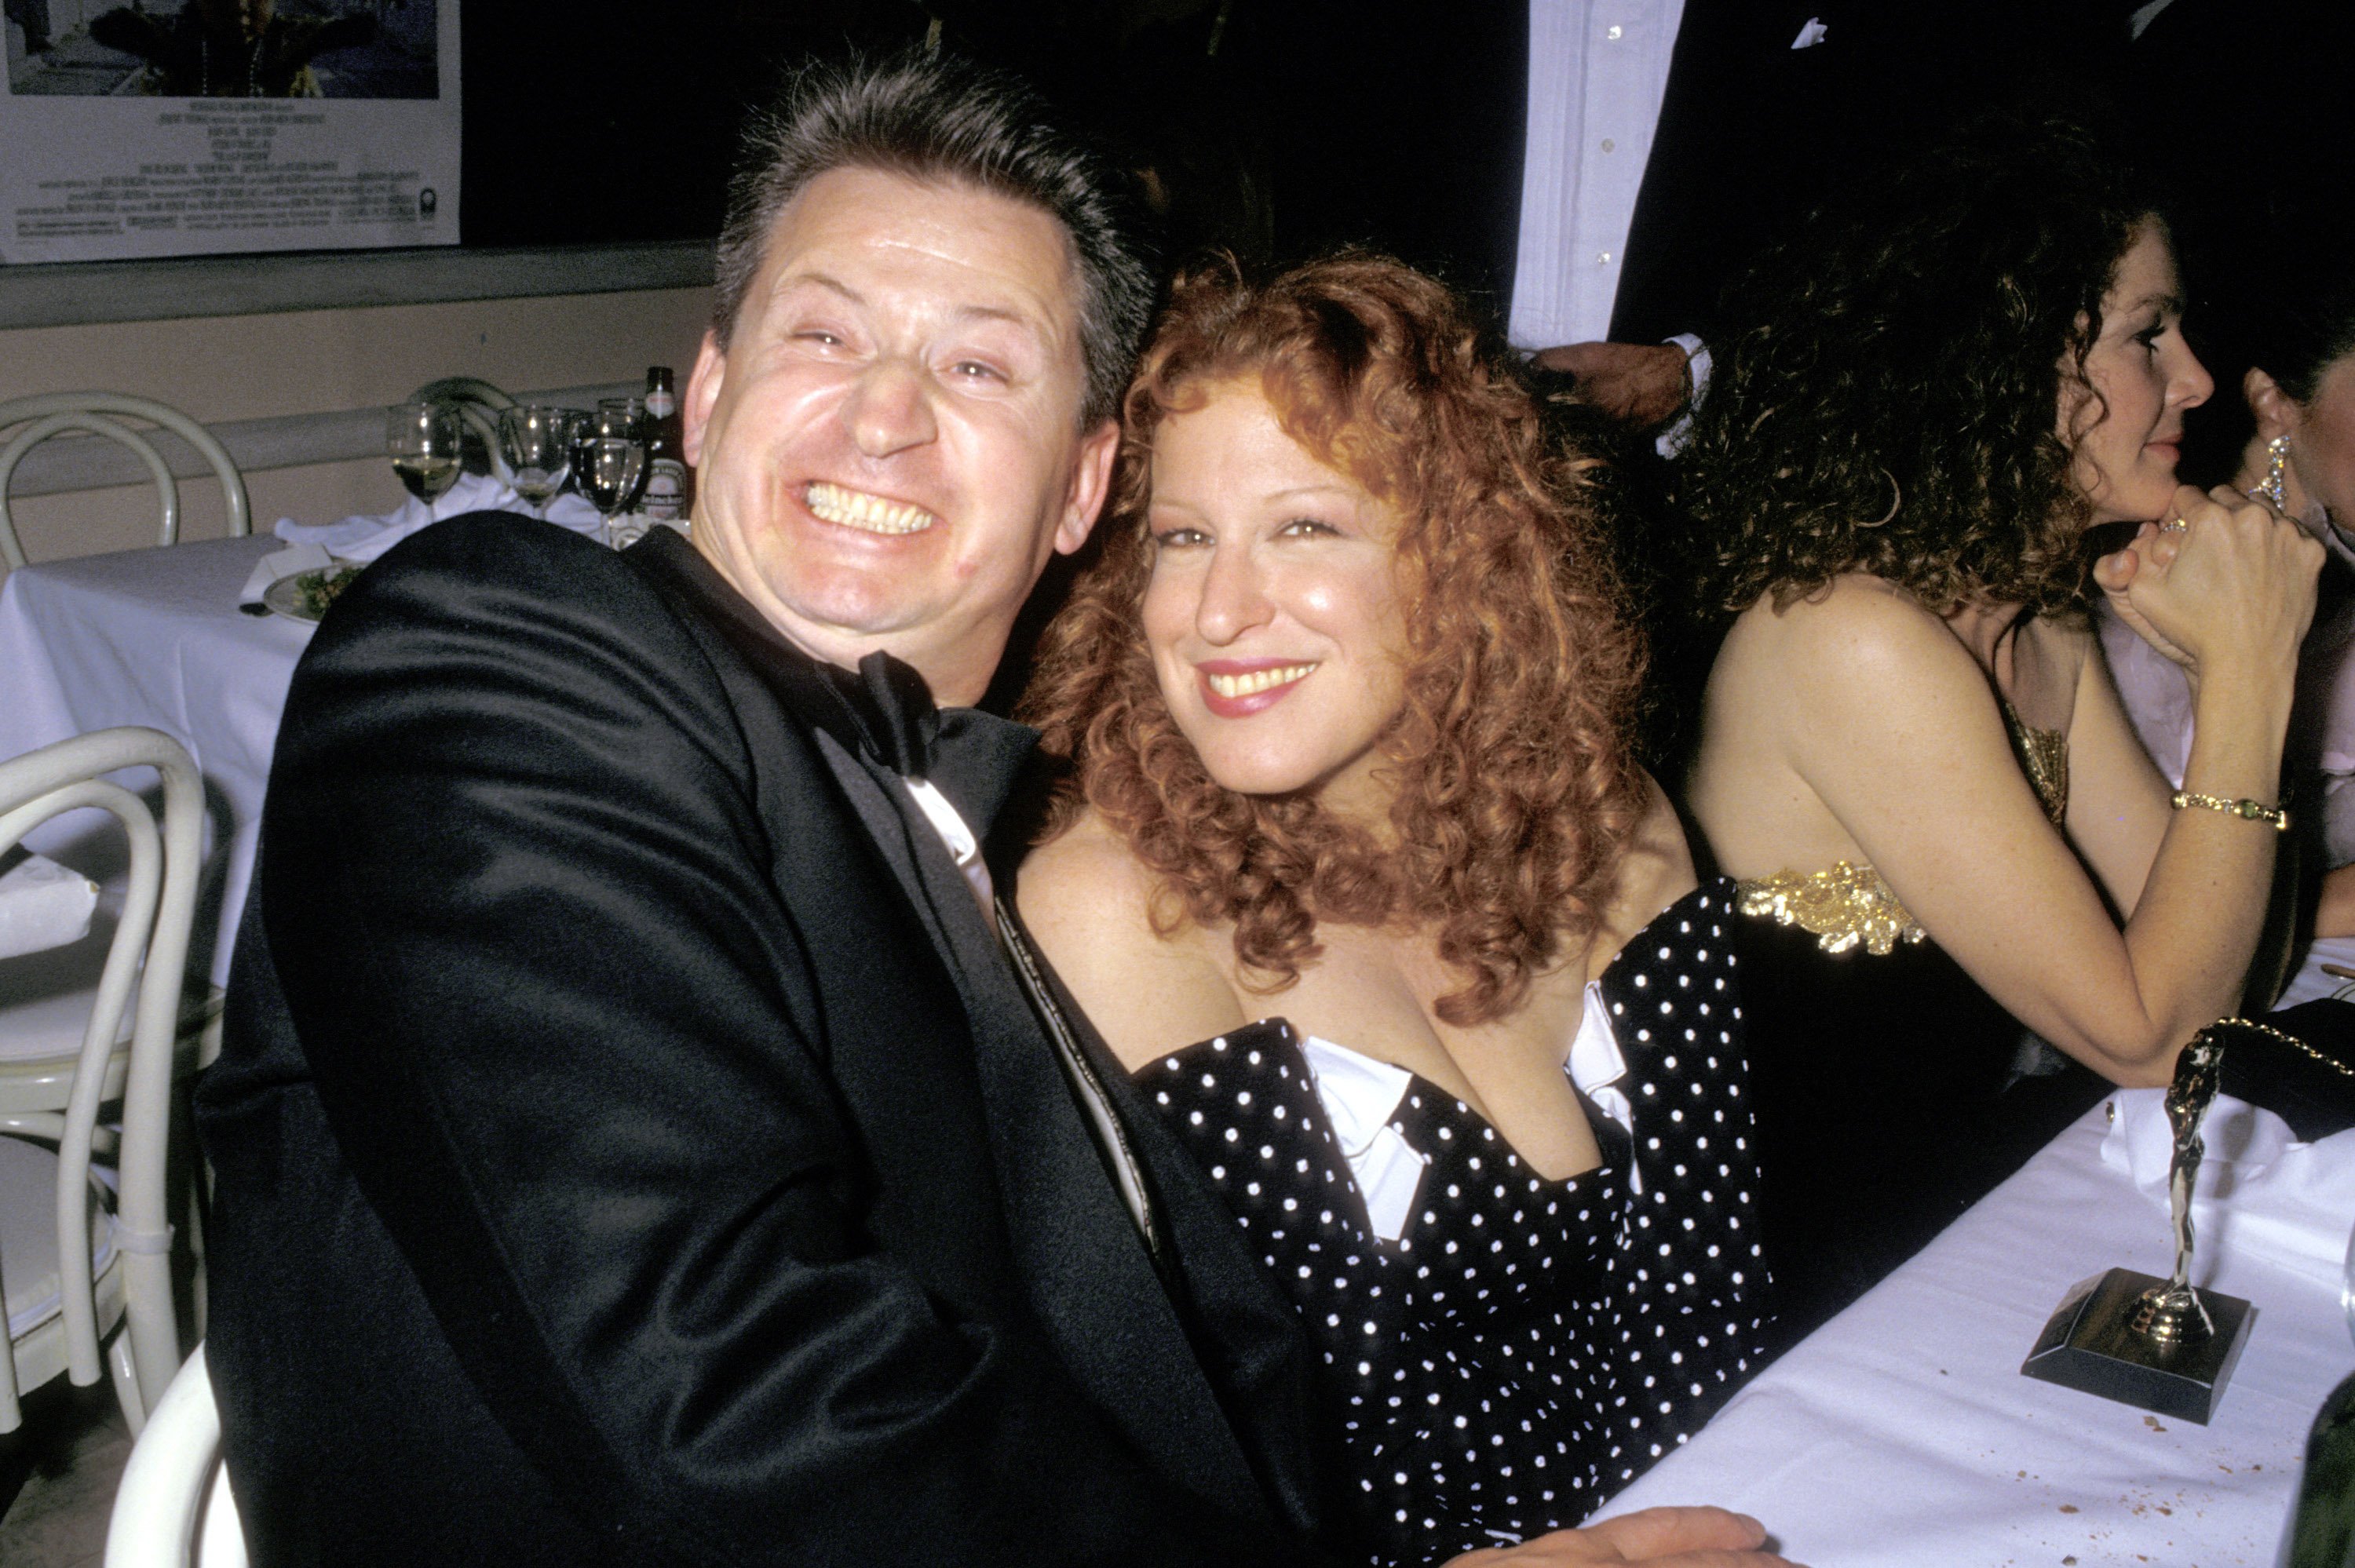 Bette Midler and Husband Martin von Haselberg at Swifty Lazar Oscar Party in Hollywood, California, United States. | Source: Getty Images